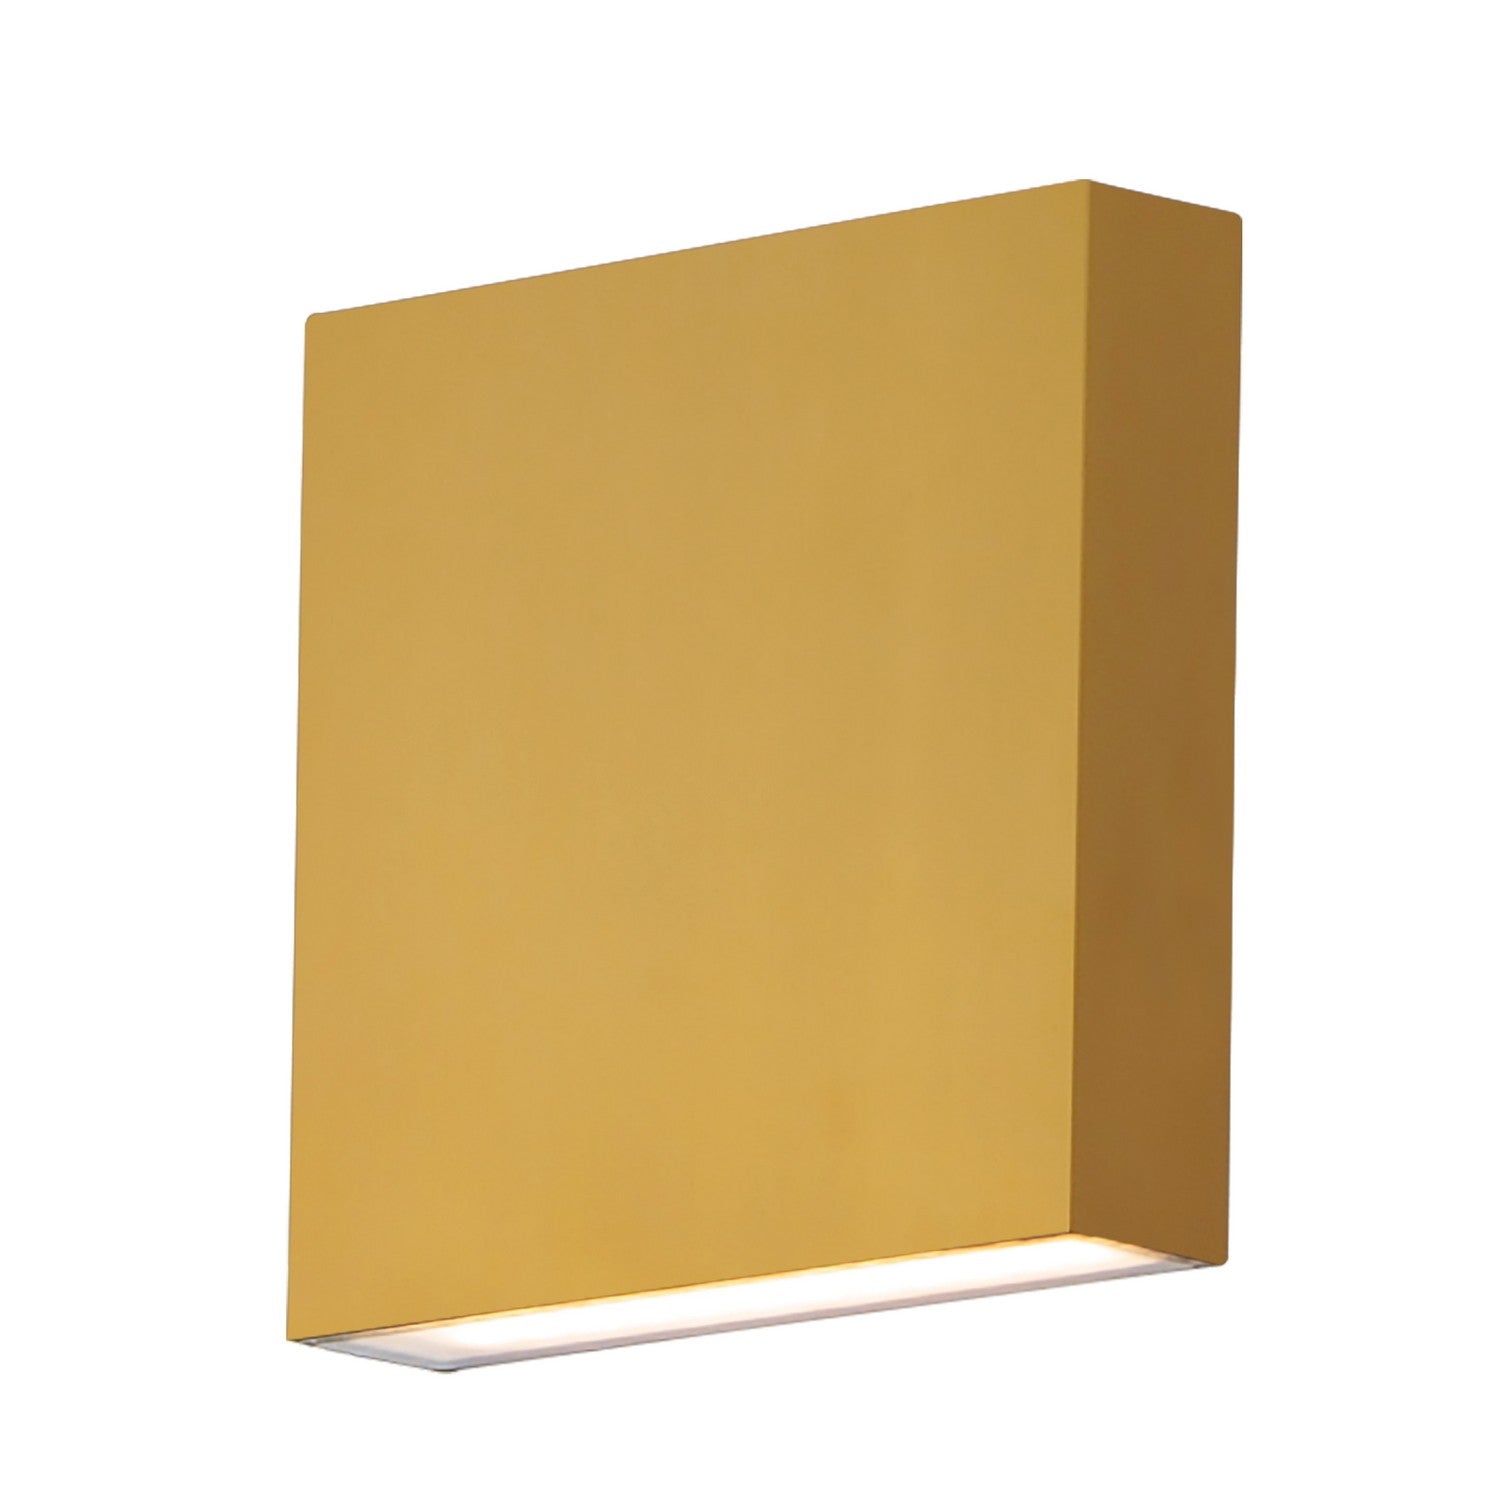 ET2 - E23214-NAB - LED Outdoor Wall Sconce - Brik - Natural Aged Brass